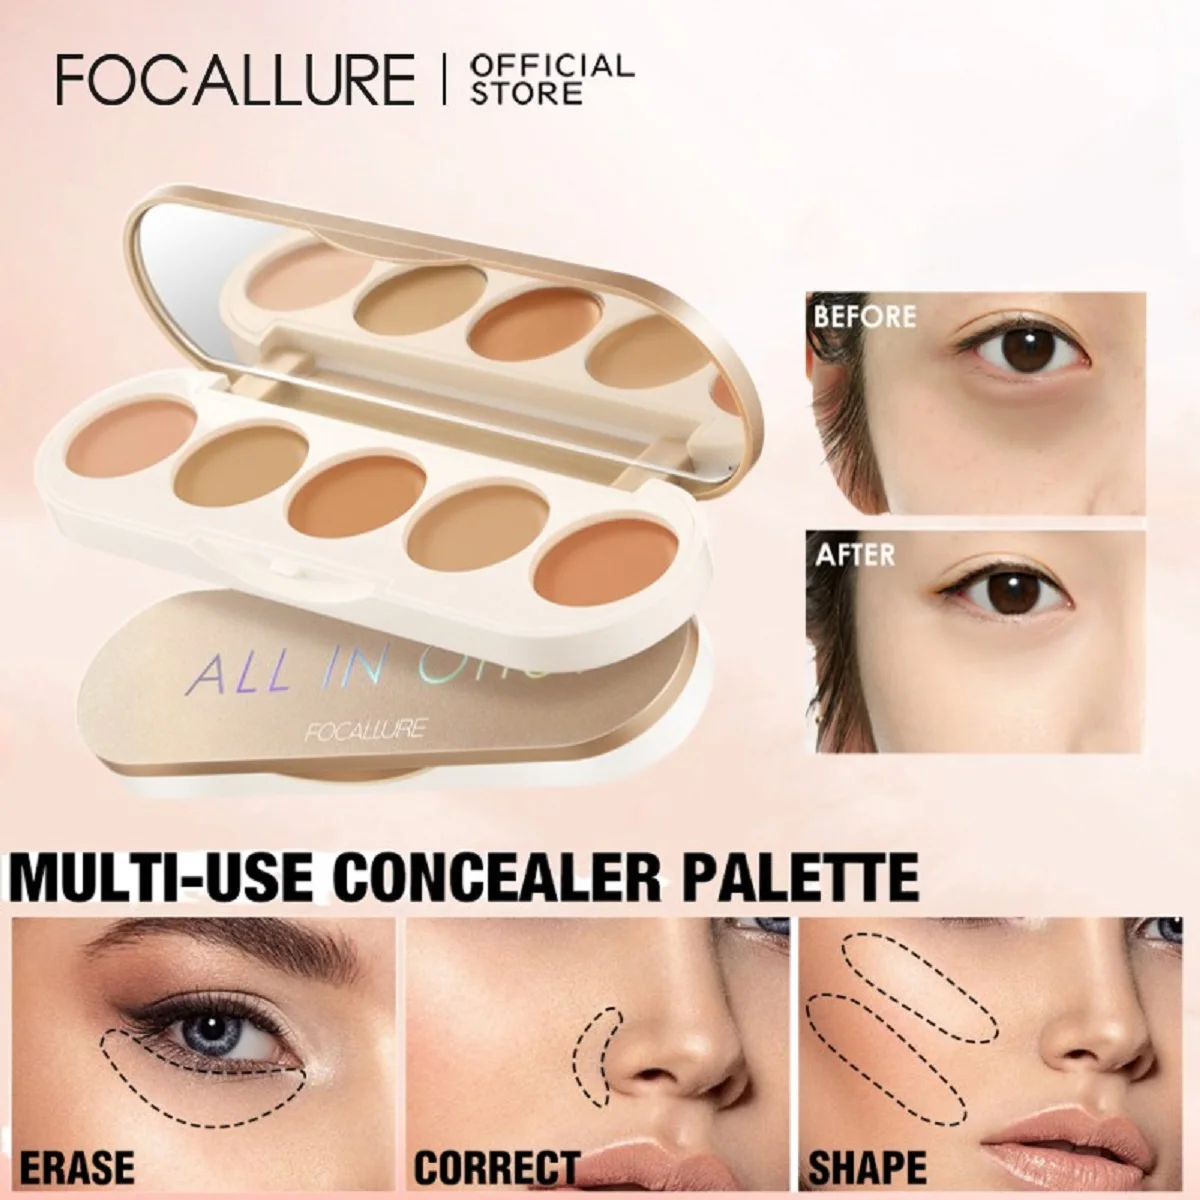 

FOCALLURE 5 In 1 Face Concealer Palette High Coverage Lightweight Longlasting Waterproof Foundation Cream Makeup Cosmetics